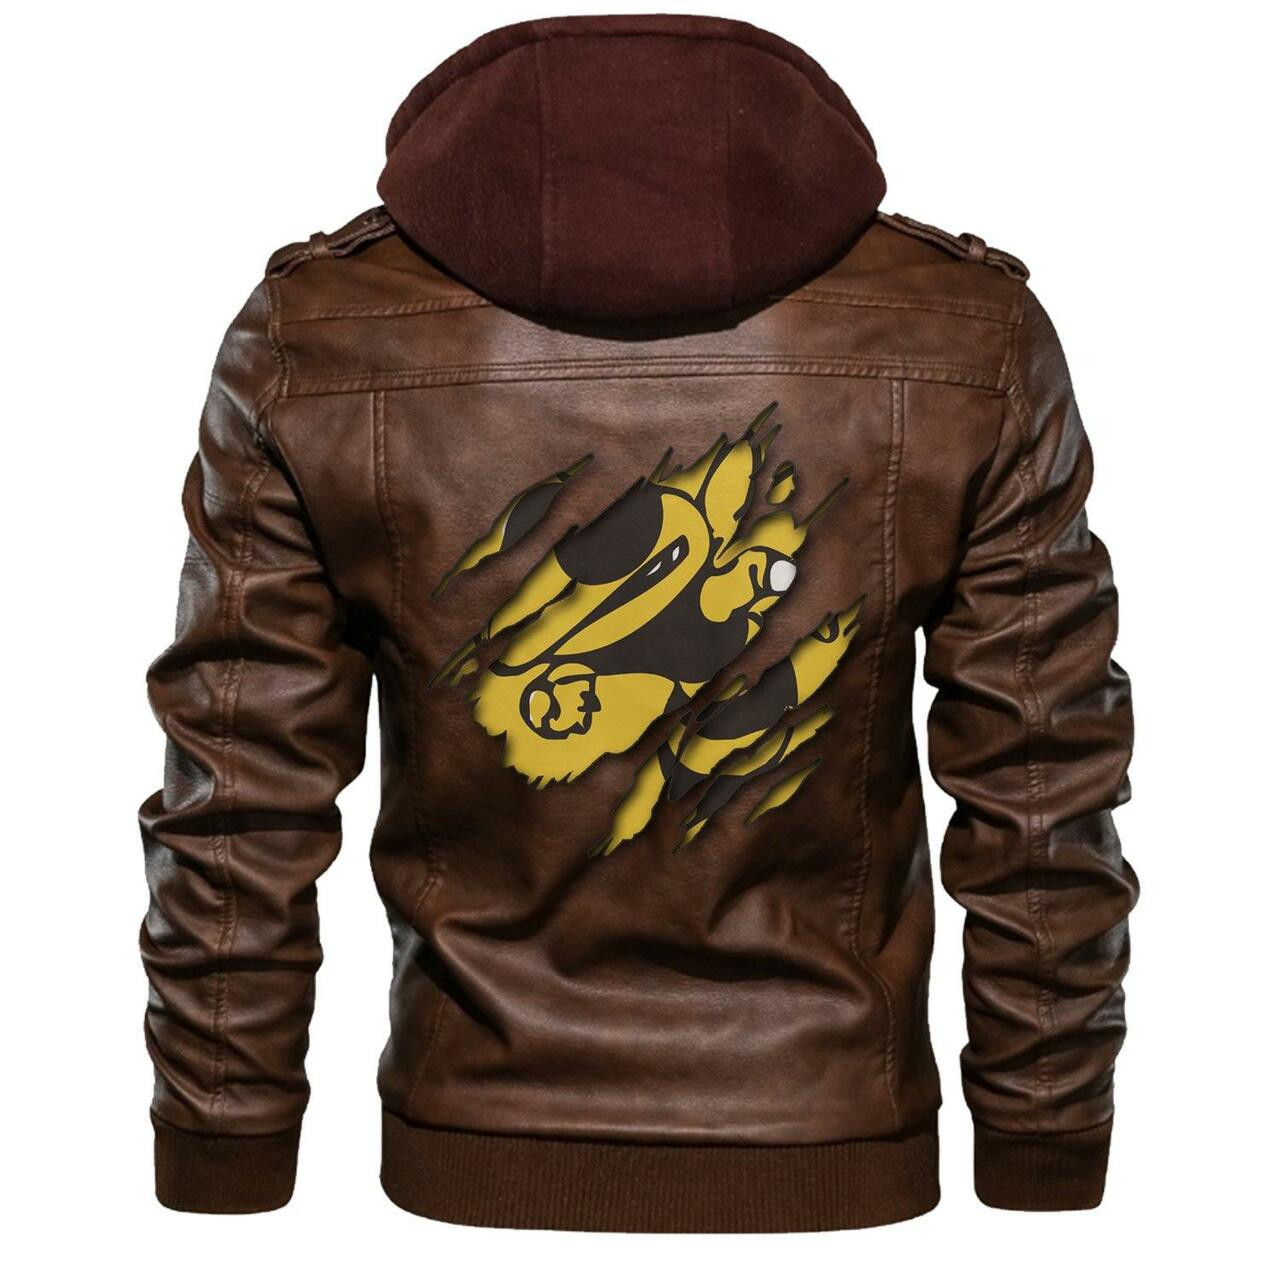 You can find a good leather jacket by access our website 89